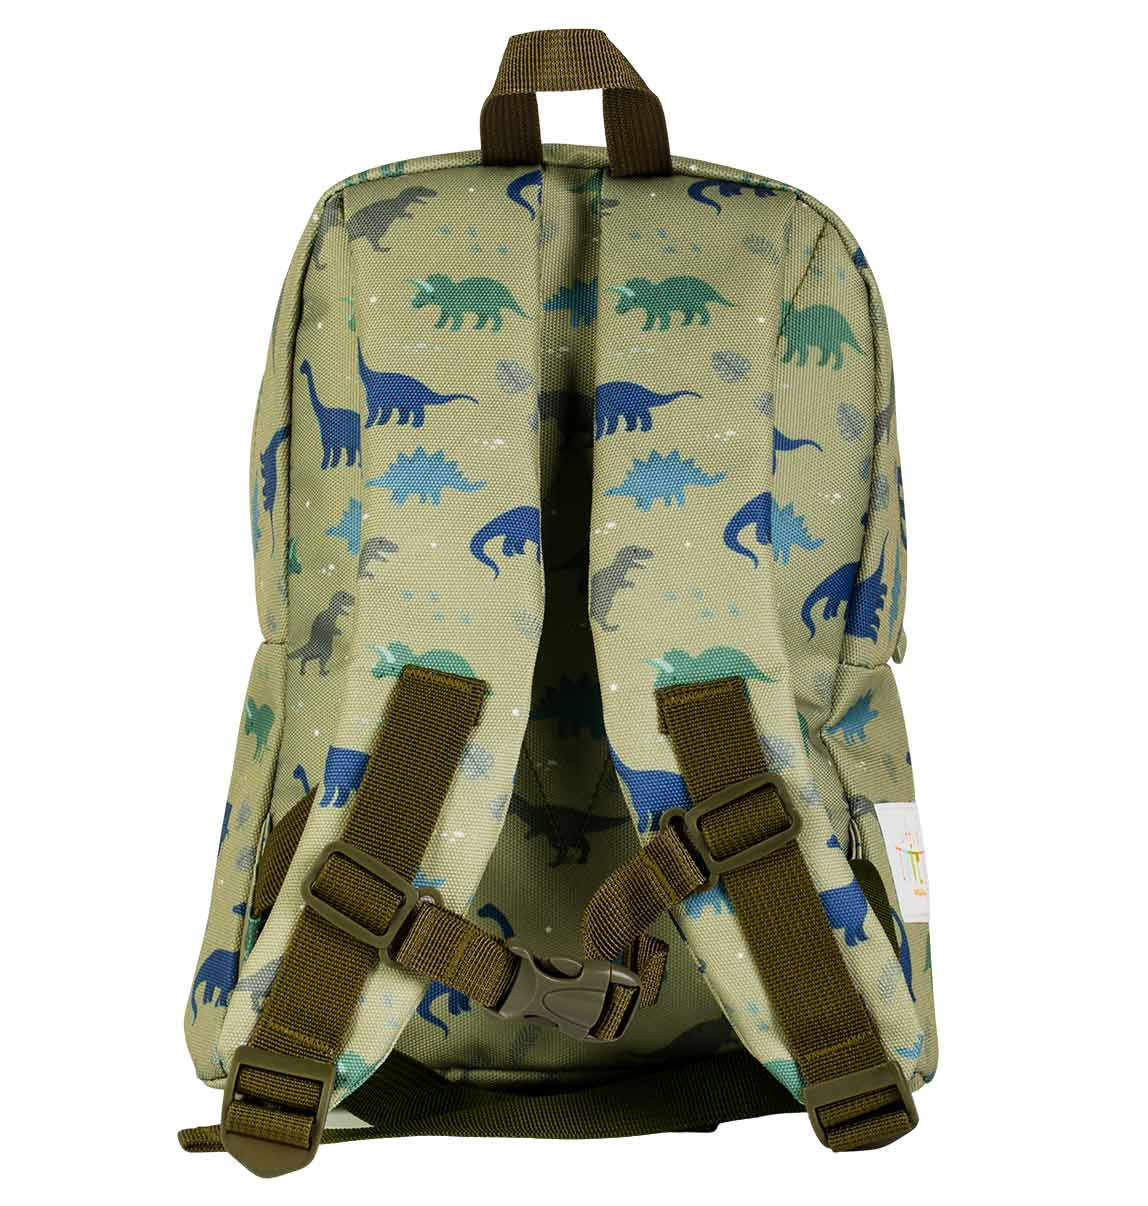 A LITTLE LOVELY COMPANY - Little backpack - Dinosaurs